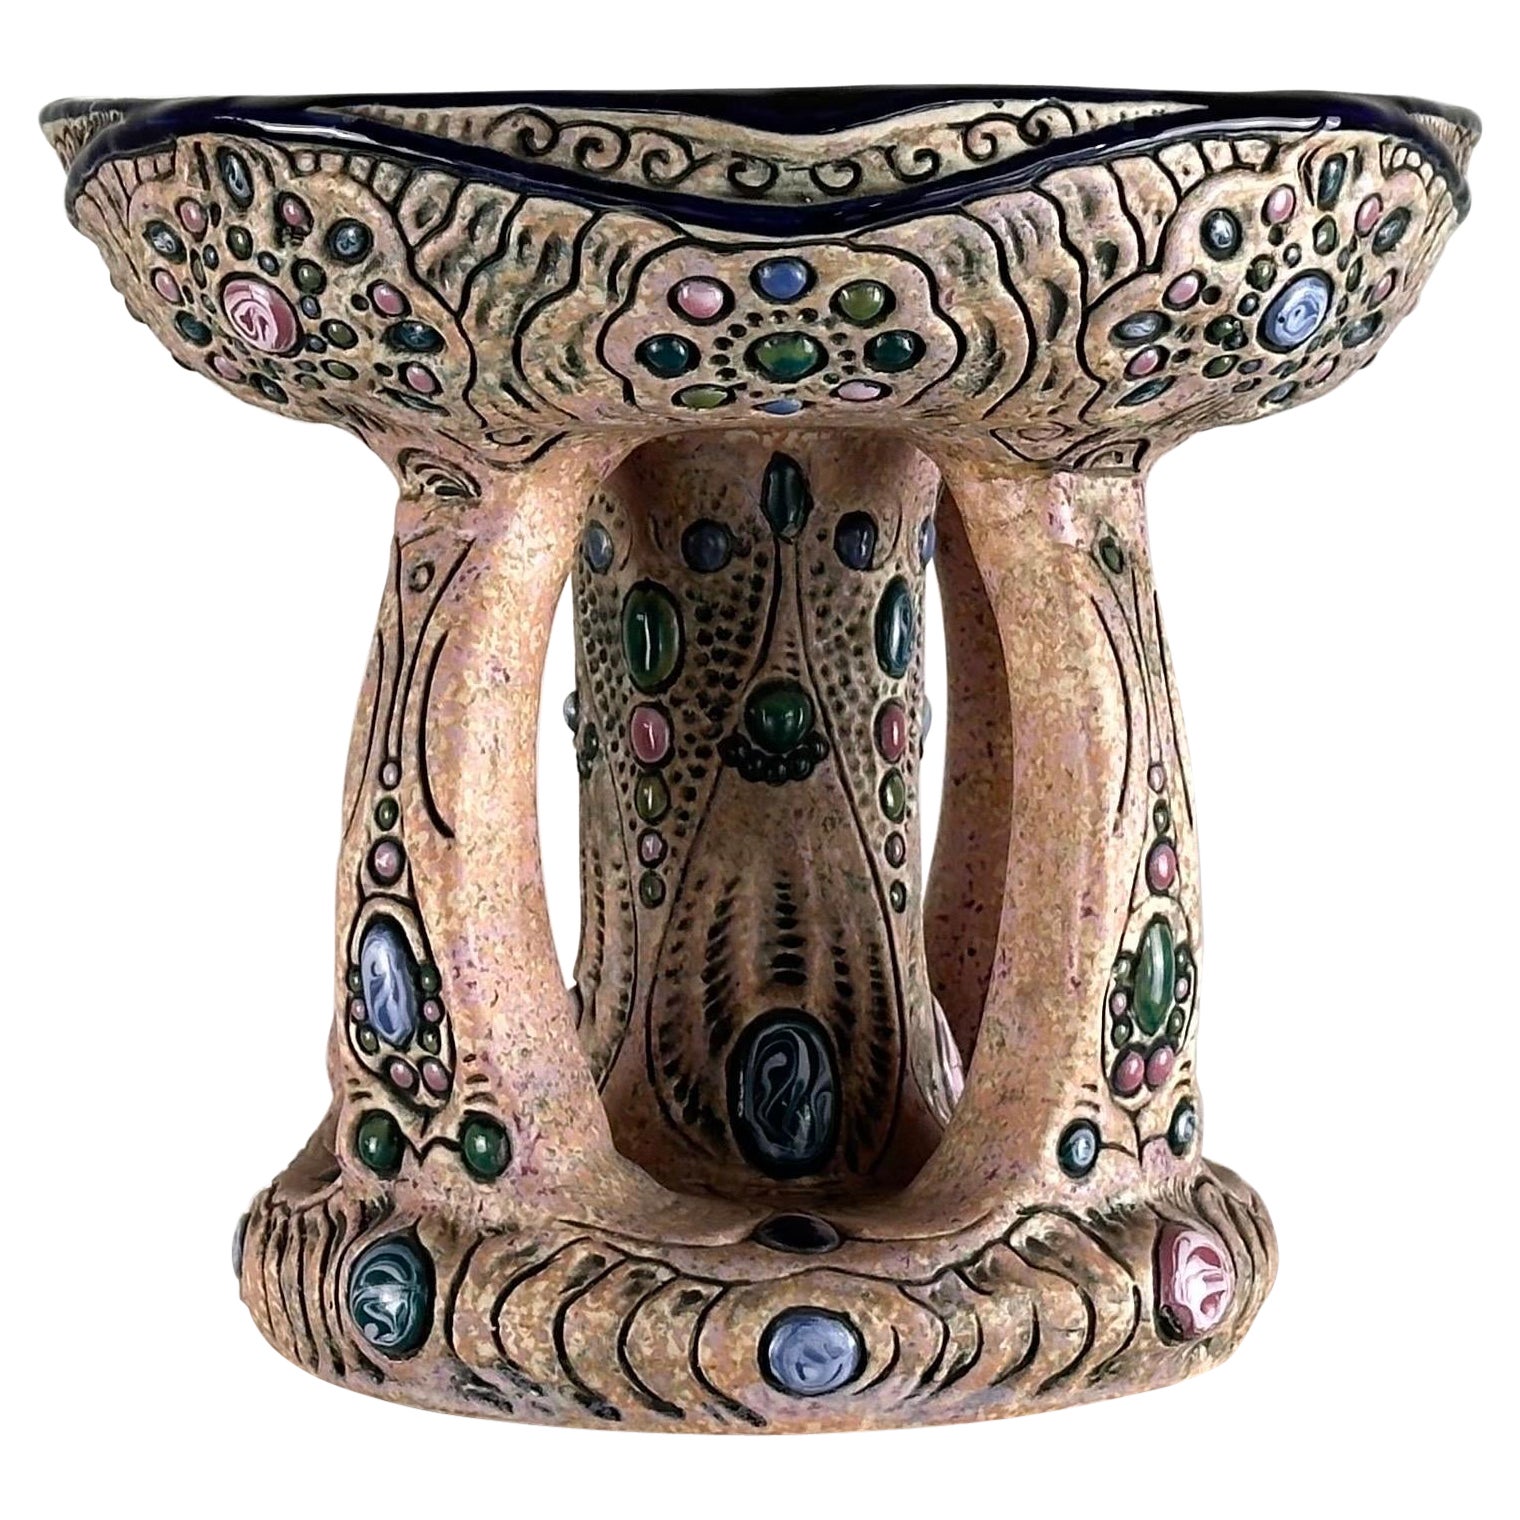 Hand-Painted Ceramic "Amphora" Czech Riser with Precious Gem Accents, 1930s For Sale